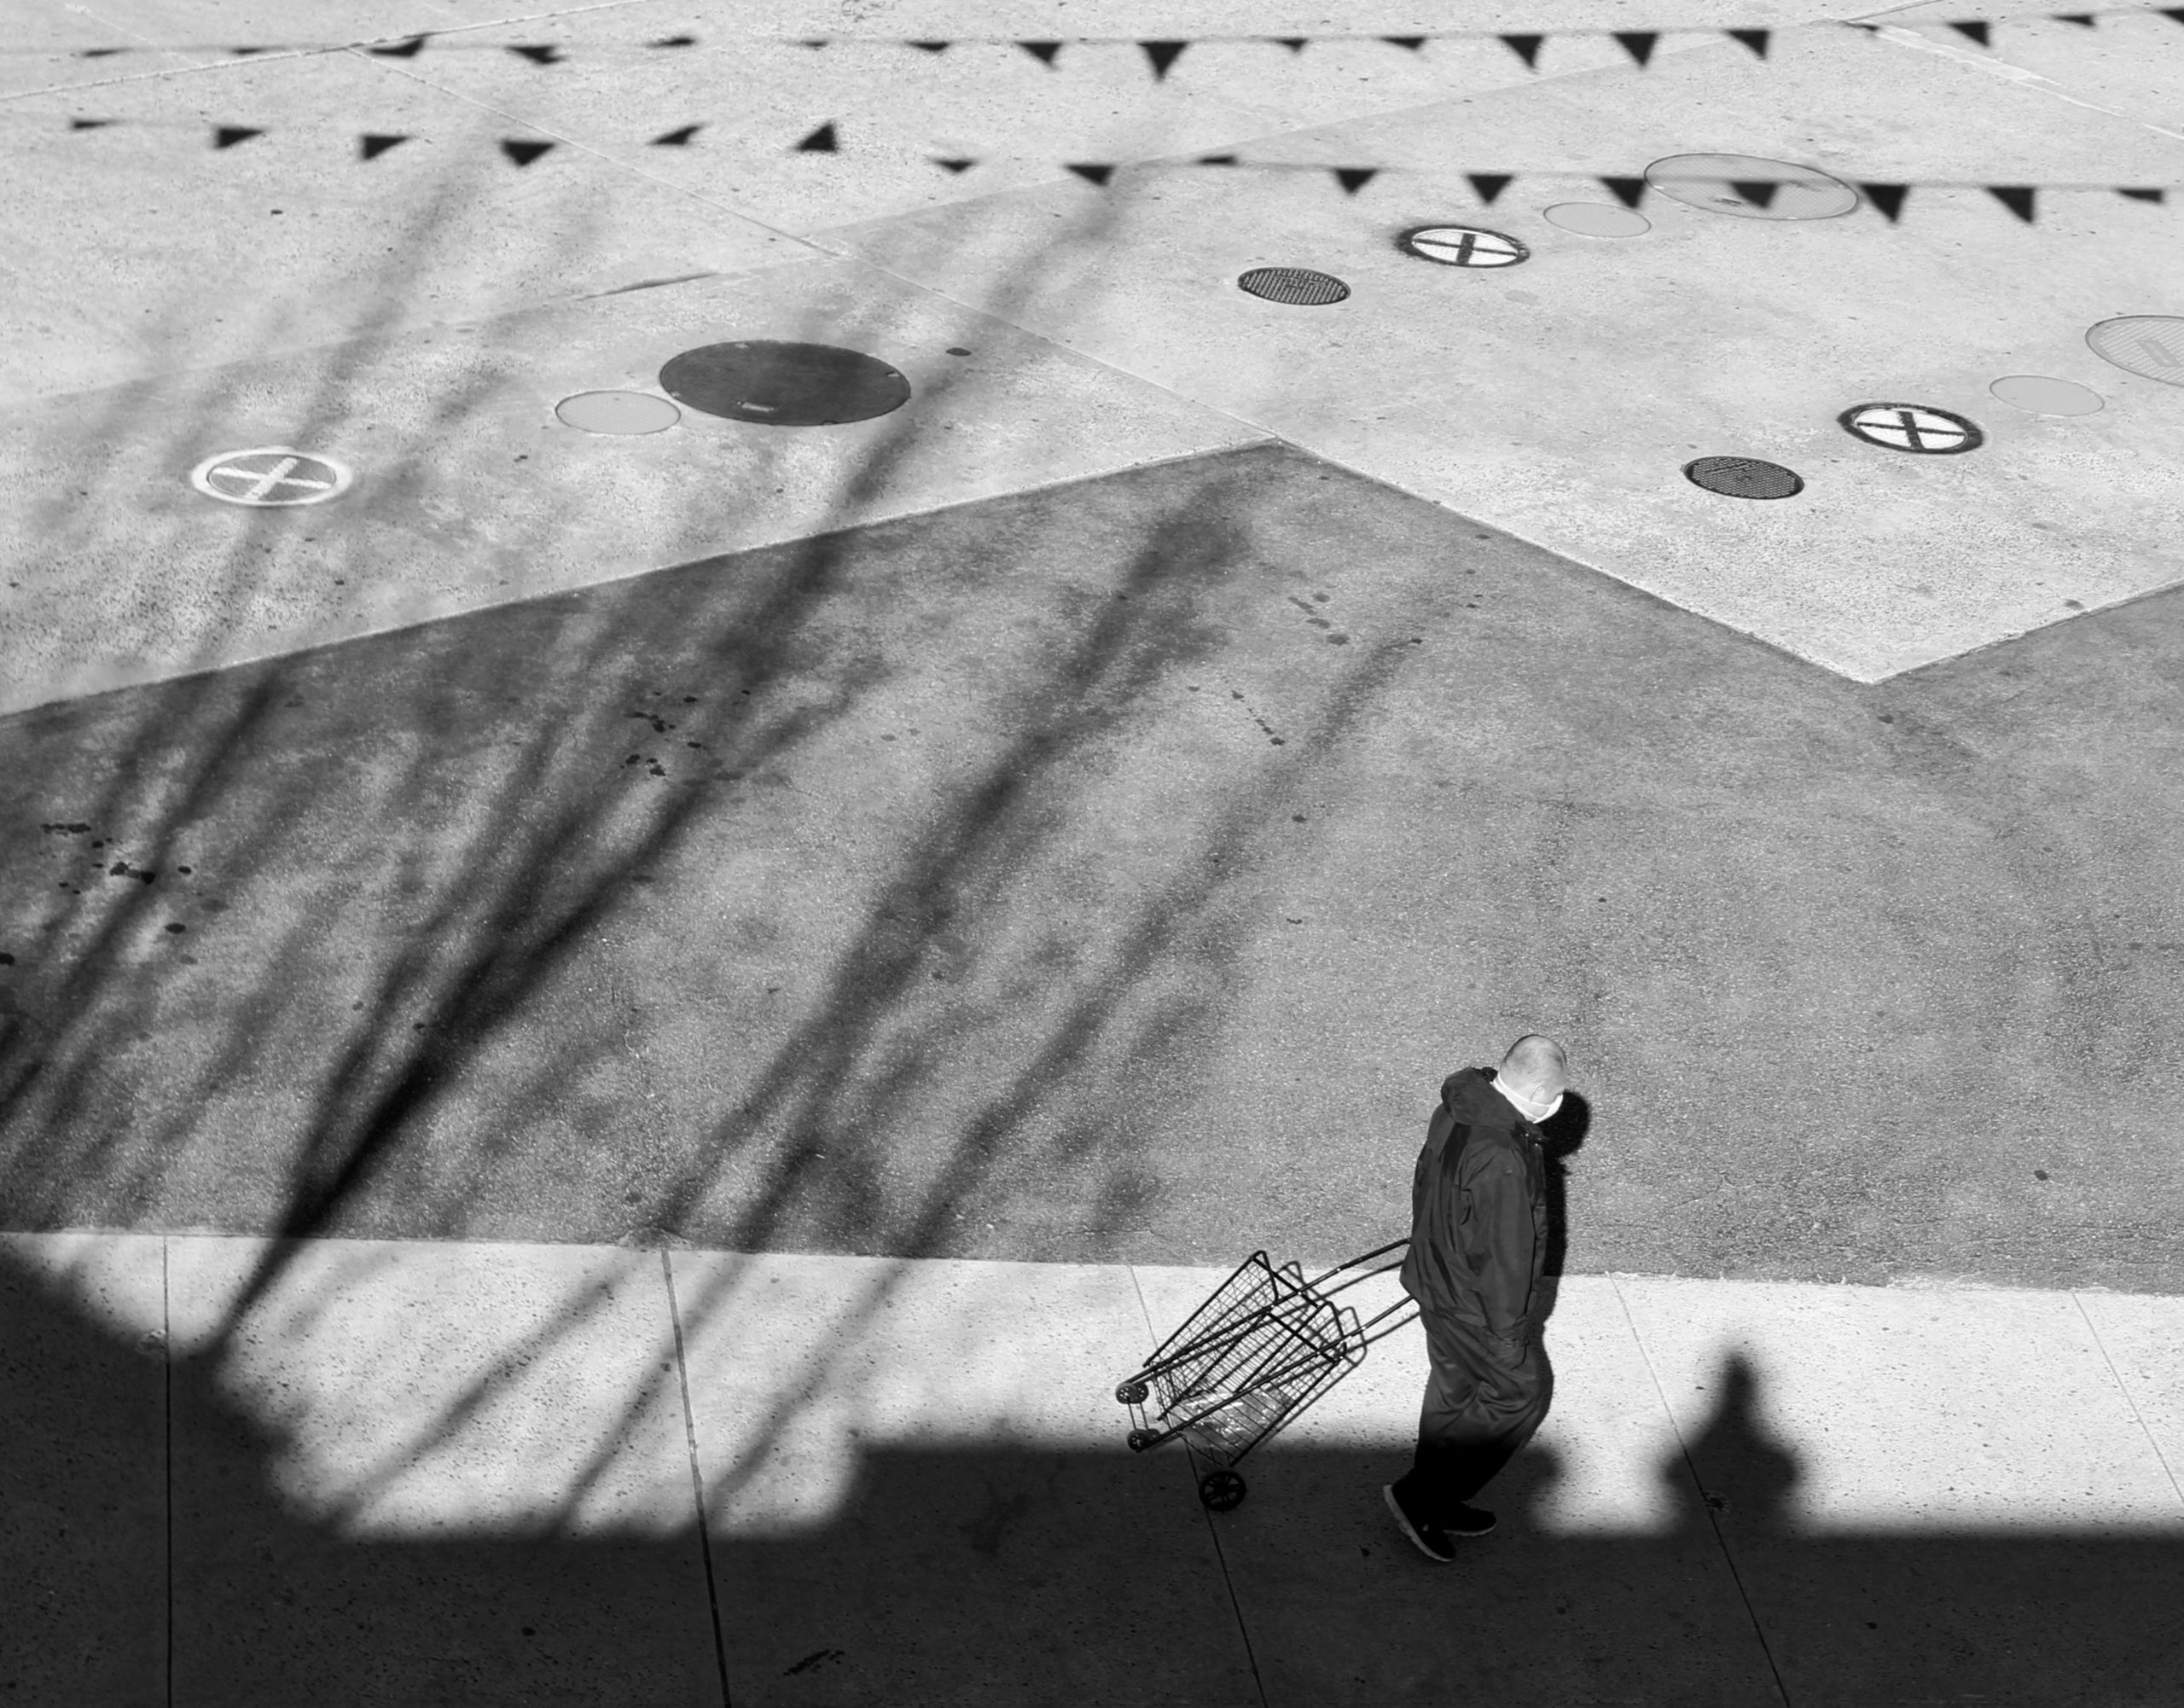 Black and White photograph taken from the rooftop, of a man walking among shadows spread across the ground